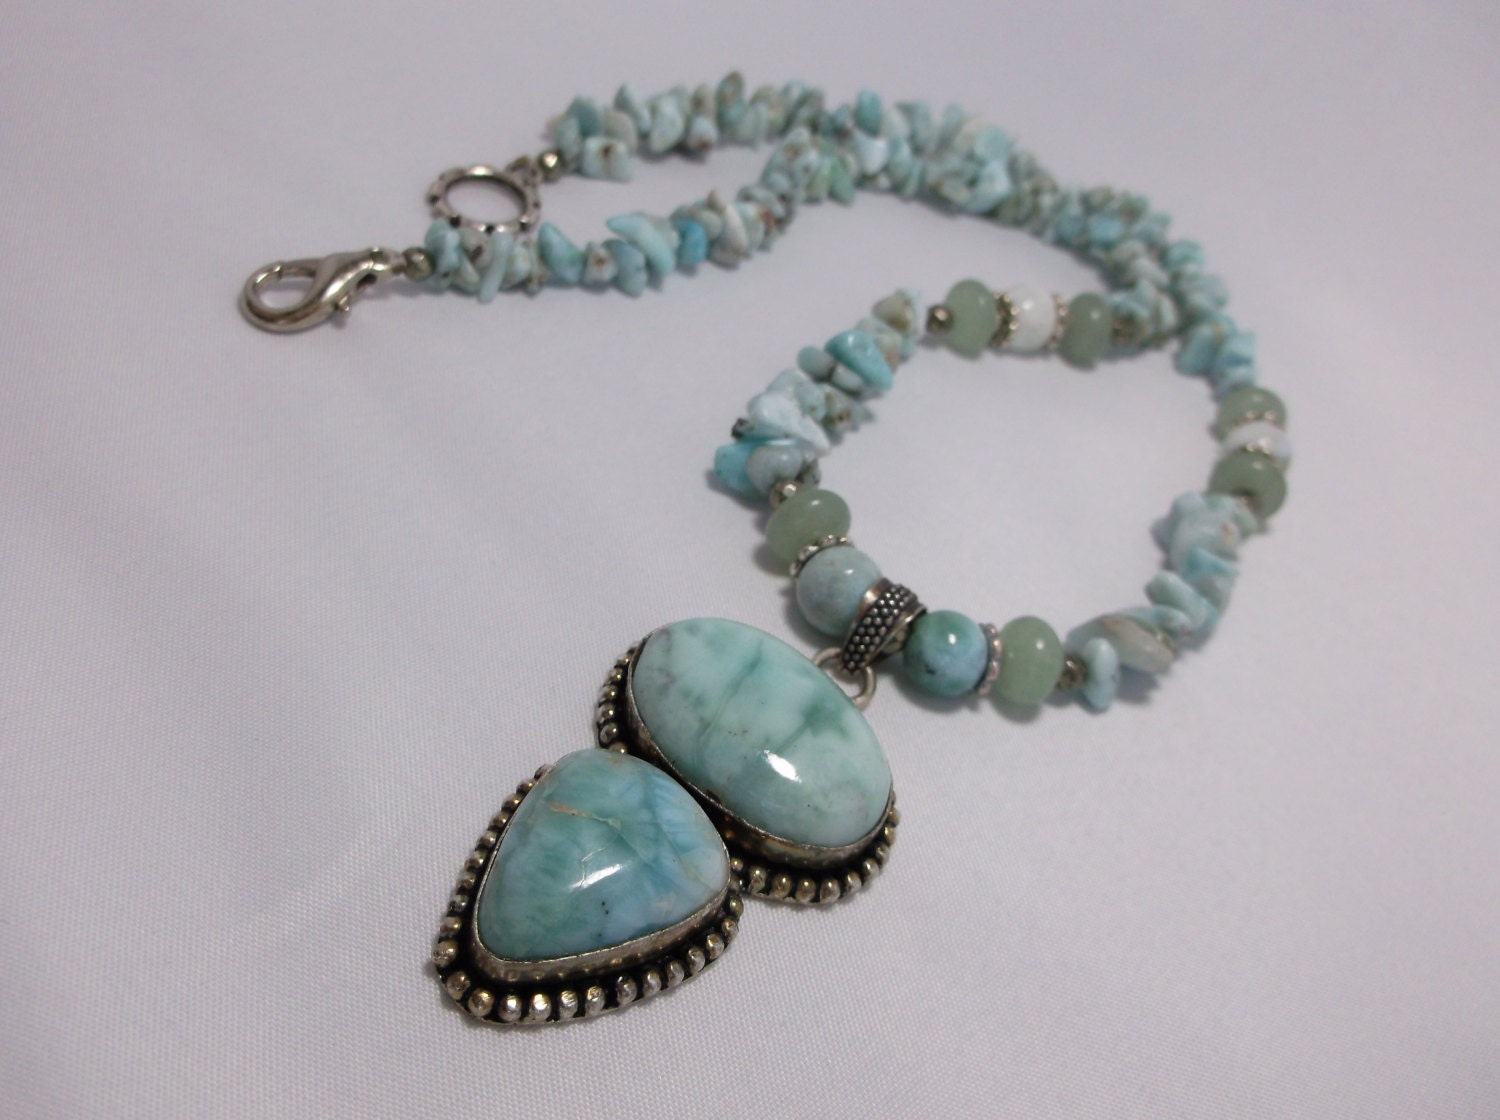 Stunning Caribbean Larimar Beaded Necklace with Aventurine and